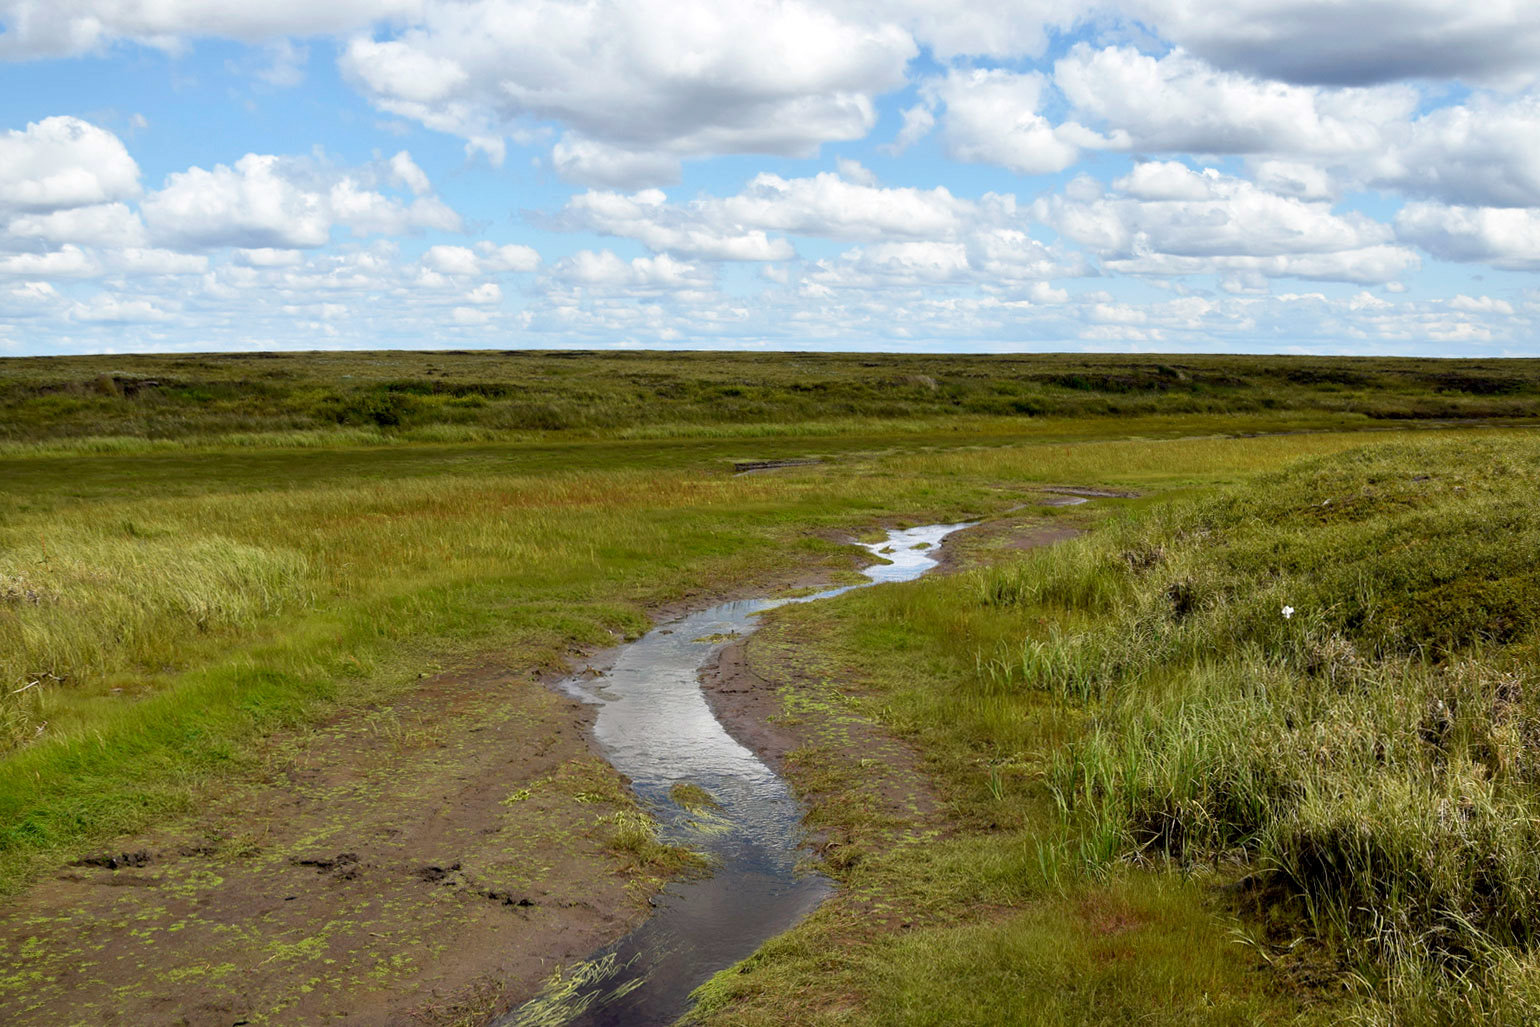 In an undated handout image, a stream in Alaska's vast Yukon Delta National Wildlife Refuge, where the speed at which the permafrost is thawing is a vital question for climate scientists. Starting just a few feet below the surface and extending tens or even hundreds of feet down, Alaska's permafrost has safely sequestered vast amounts of carbon for centuries. (John Schade via The New York Times)